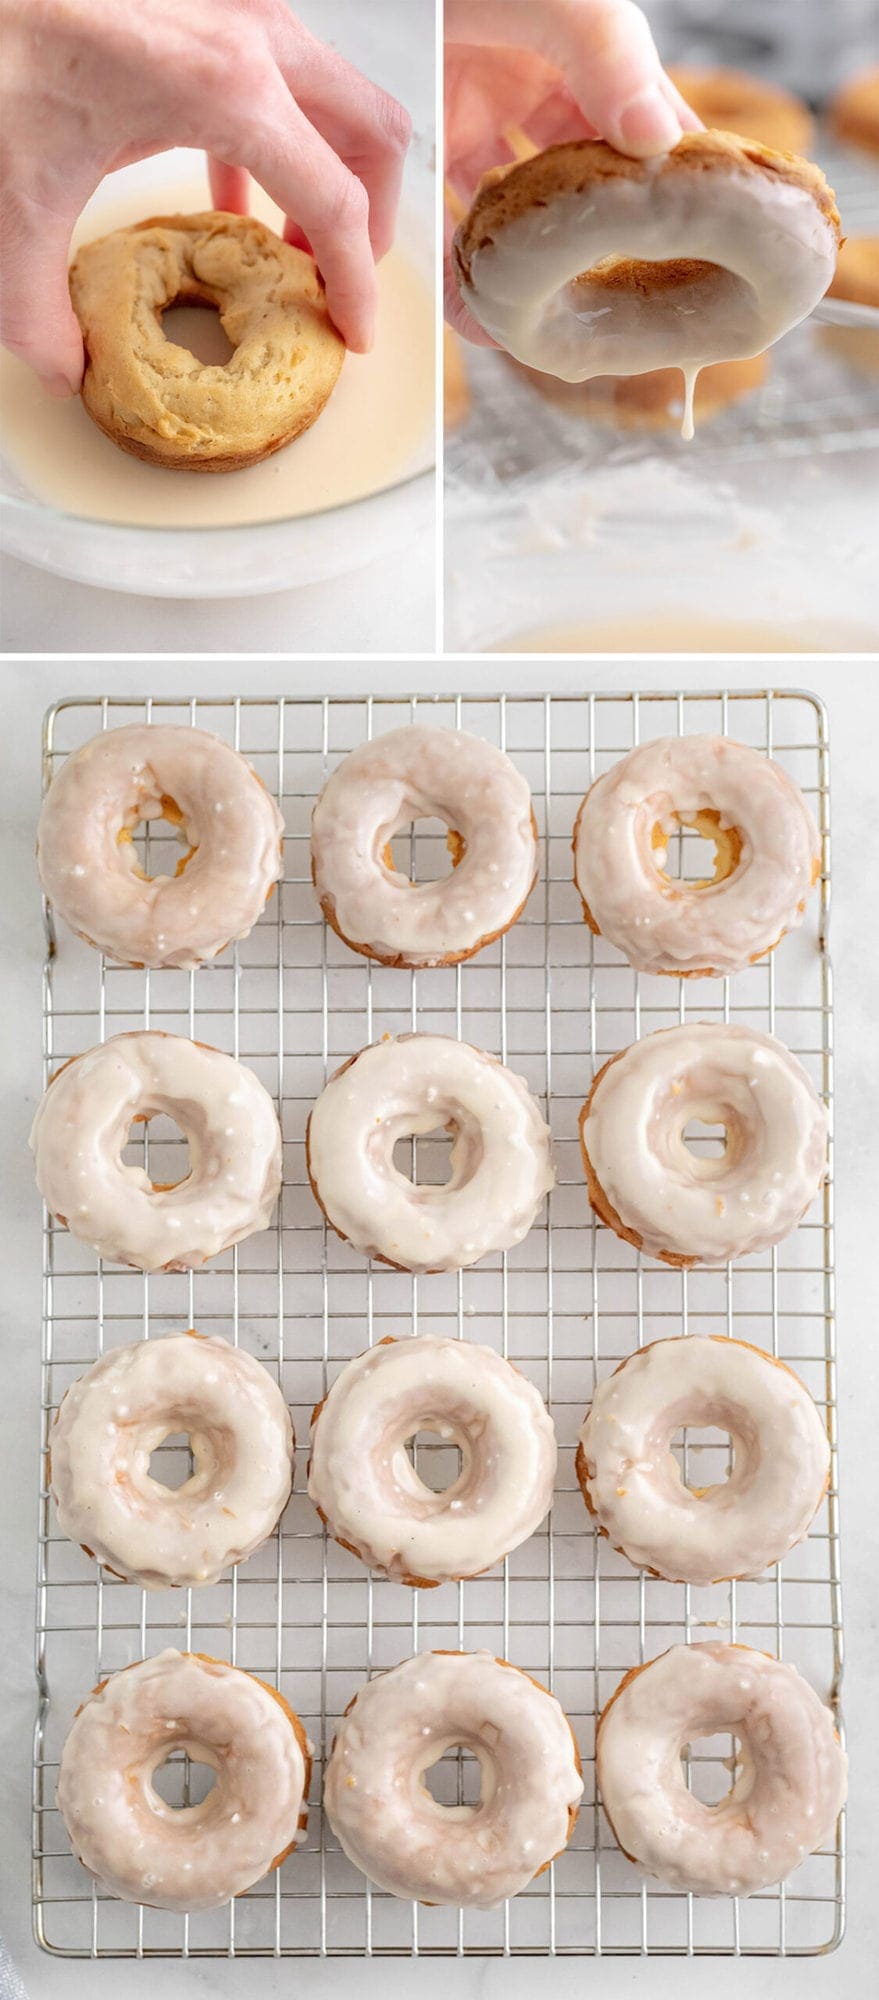 baked donuts being dipped in glaze